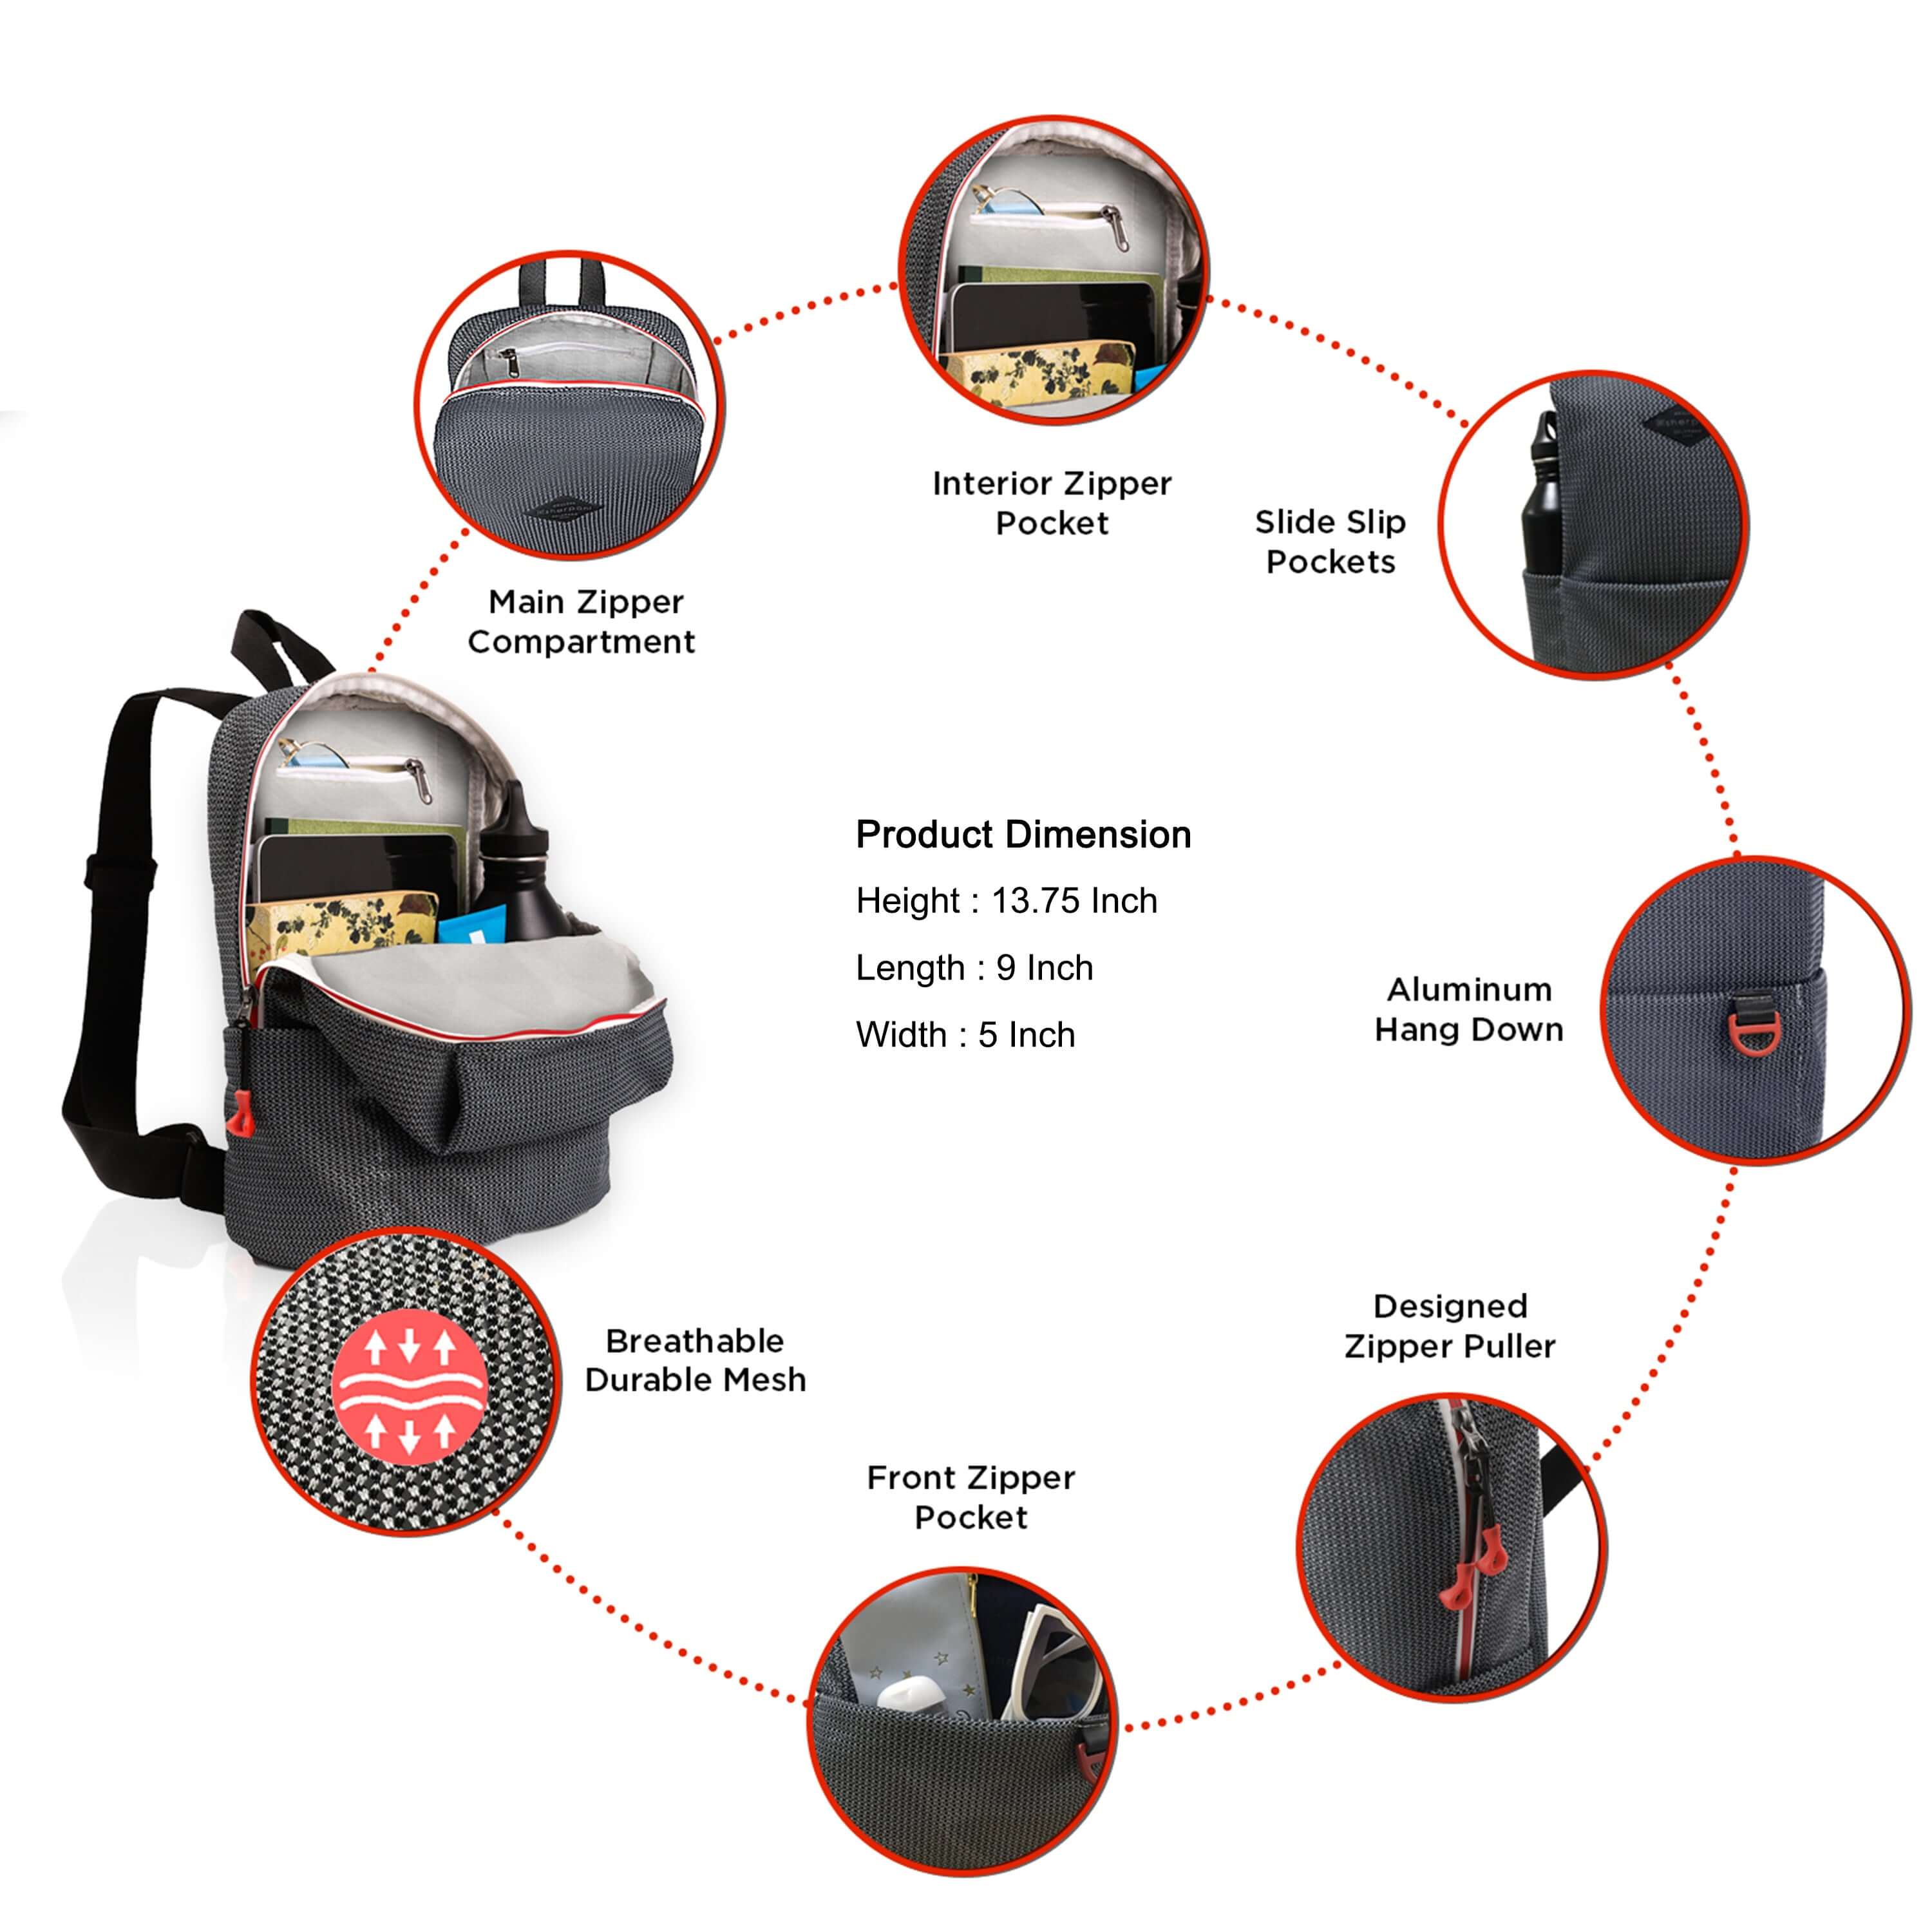 Graphic showcasing the features of Sherpani mesh backpack, the Adaline. Black text sits next to corresponding photos arranged in a circle: Main Zipper Compartment, Interior Zipper Pocket, Side Slip Pockets, Aluminum Hang Down, Designed Zipper Puller, Front Zipper Pocket, Breathable Durable Mesh, Product Dimensions Height: 13.75 Inch Length: 9 Inch Width 5 Inch.